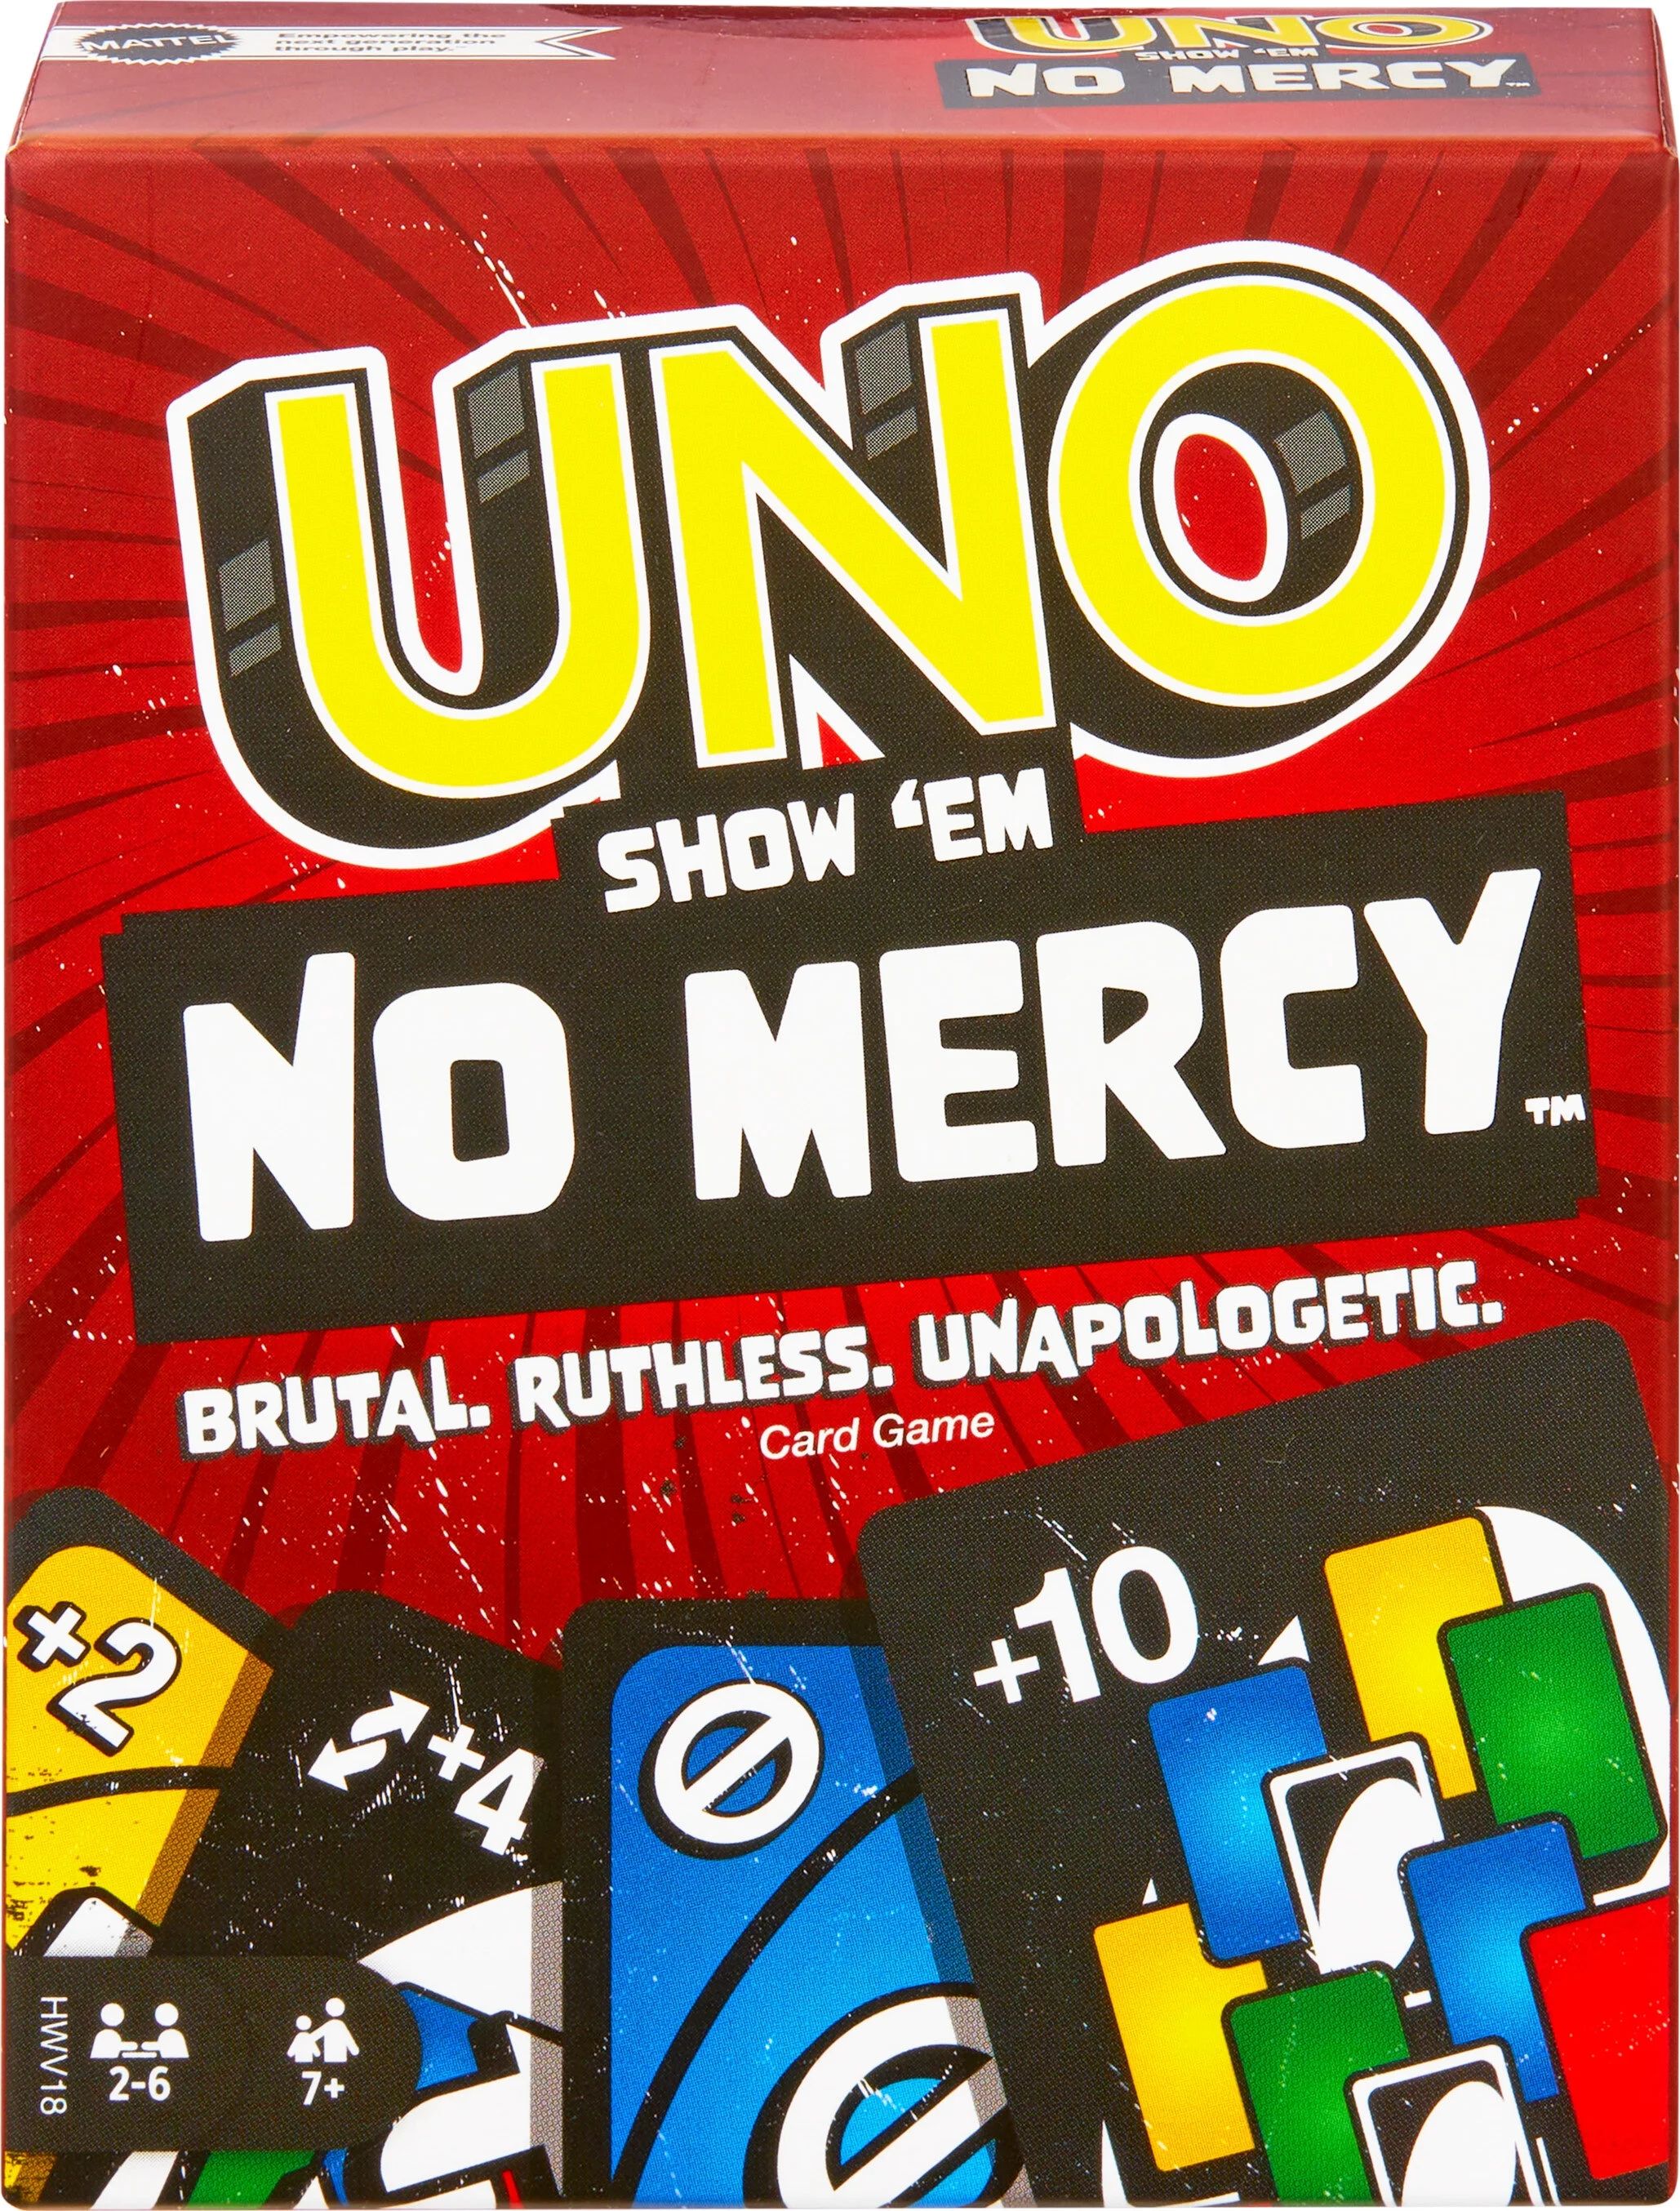 UNO Show ‘em No Mercy Card Game for Kids, Adults & Family Night, Parties and Travel | Walmart (US)